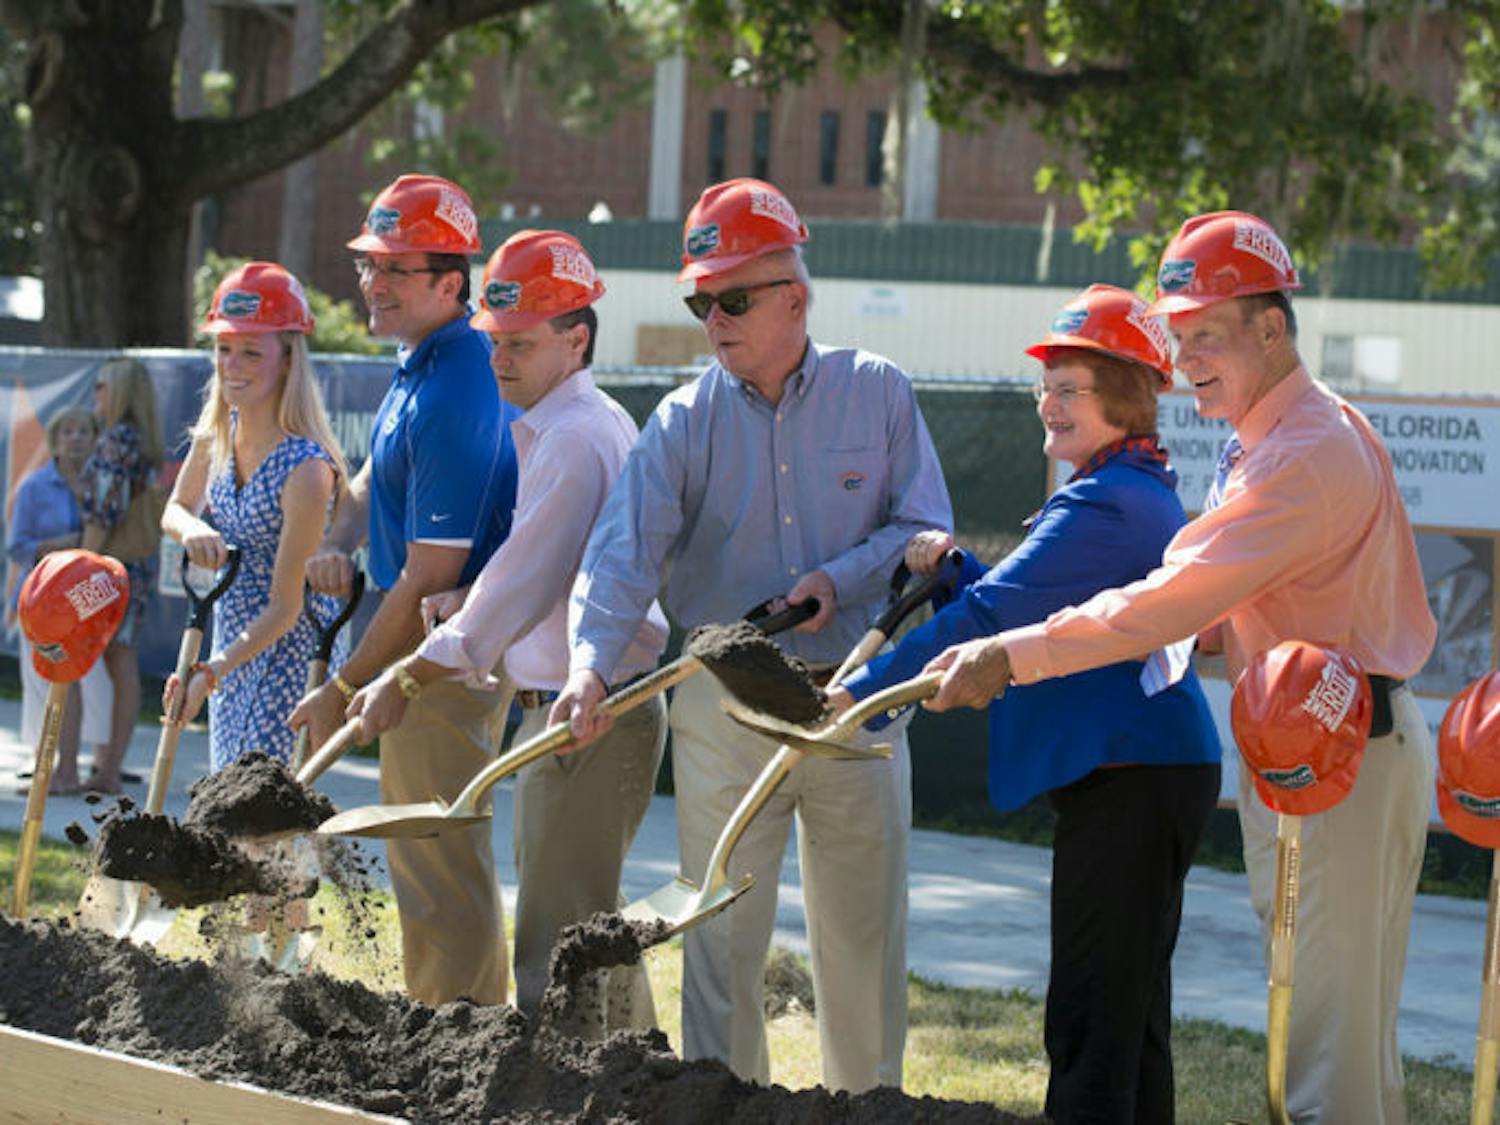 Student Body President Christina Bonarrigo, state Rep. Seth McKeel and UF President Bernie Machen were among the people who dug into dirt with golden shovels during the groundbreaking ceremony for the Reitz Union expansion.